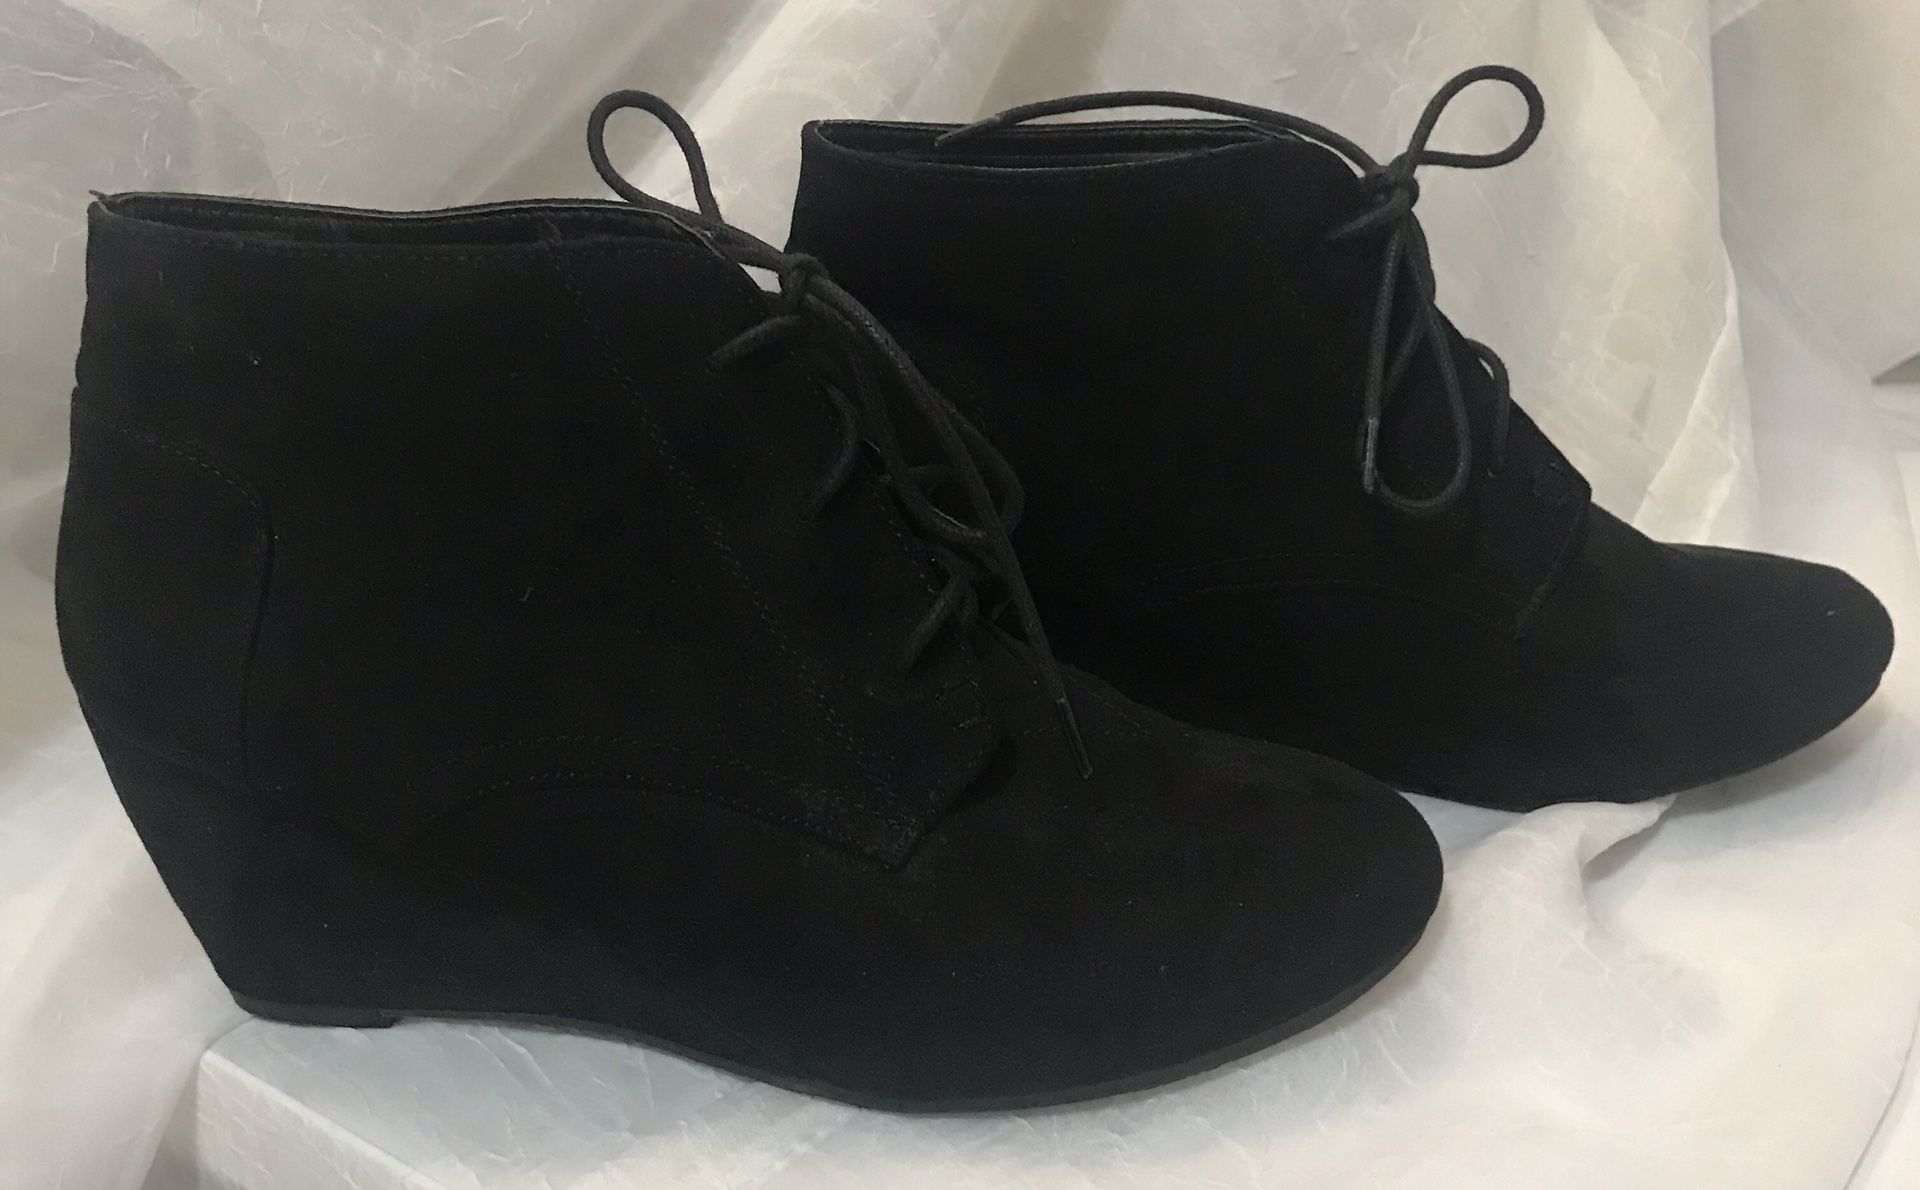 BLACK SUEDE WEDGED HEEL BOOTS ~ Size 10